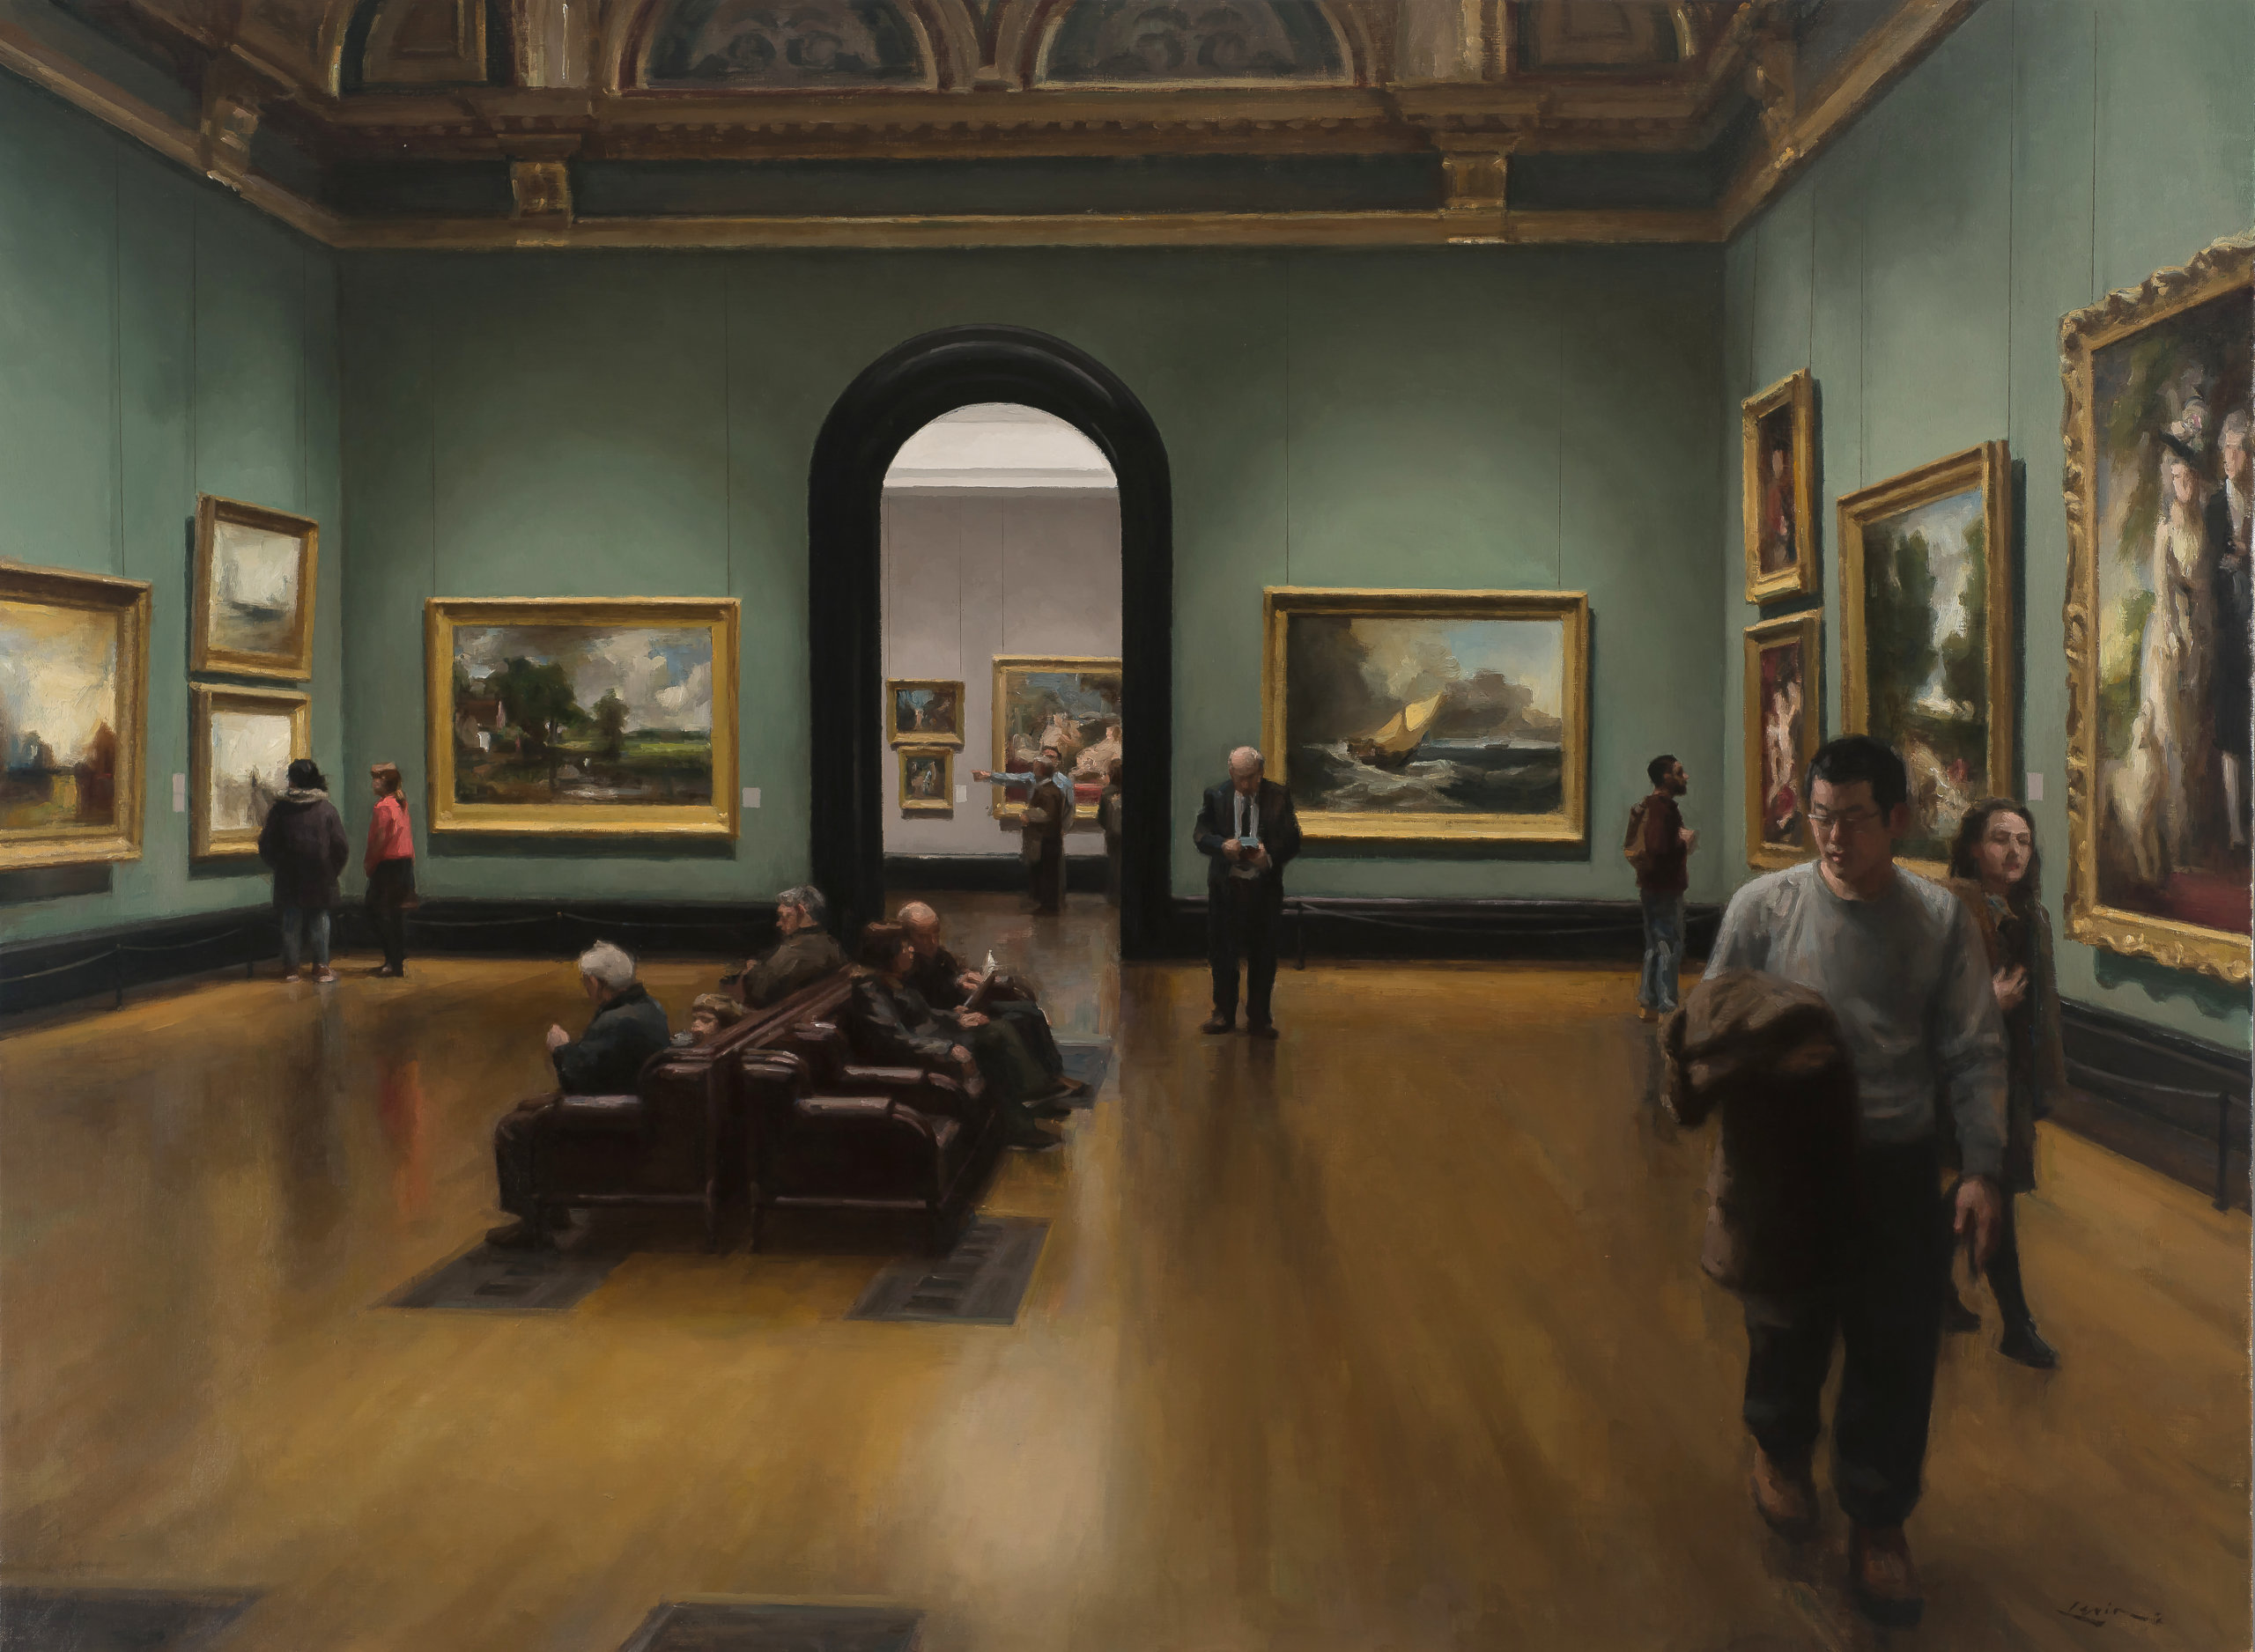 Steven J. Levin's "National Gallery of London" (34 x 46, oil on canvas, 2017)